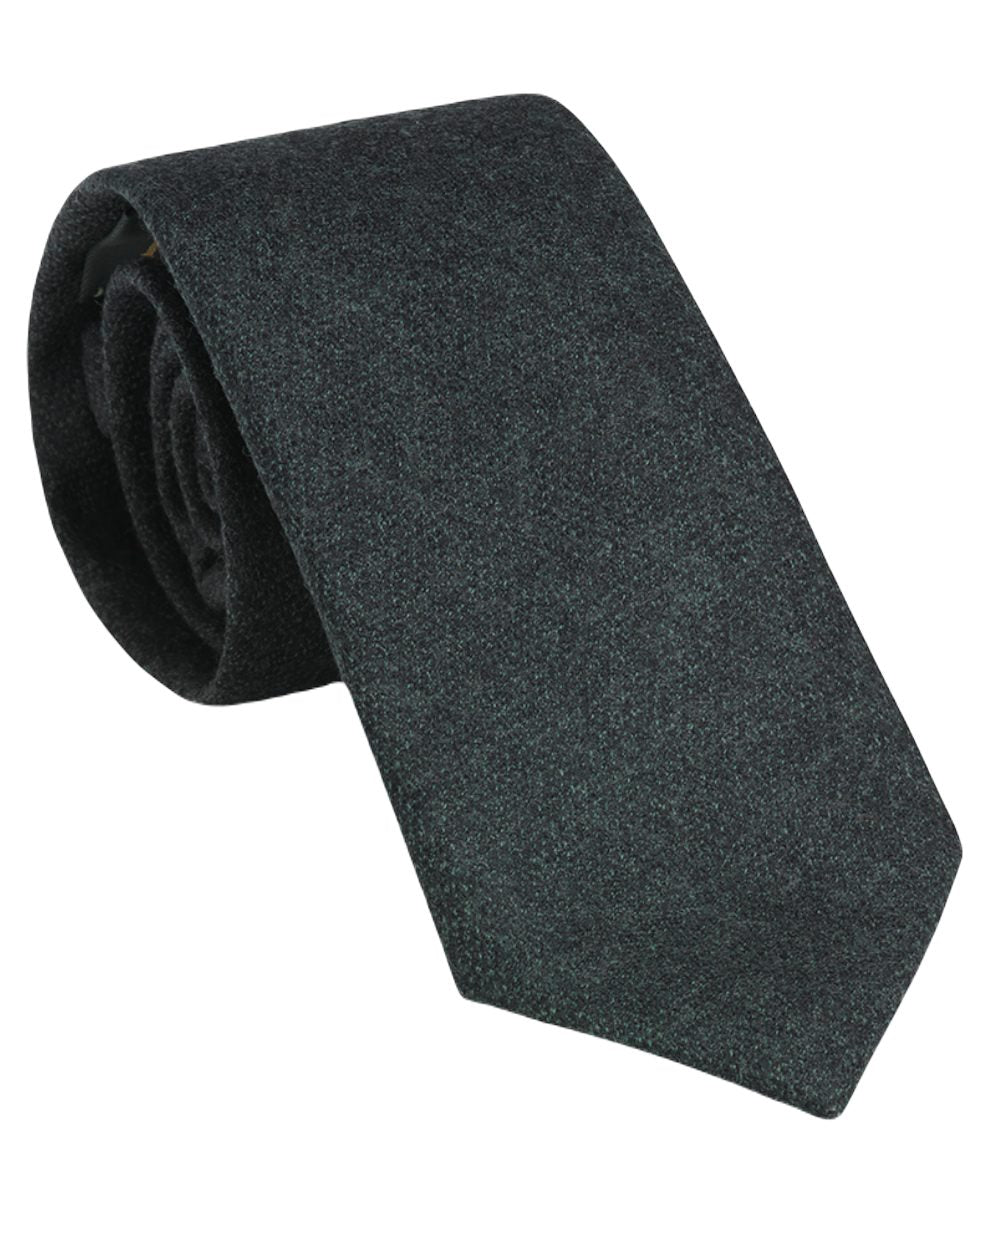 Loden Coloured Laksen Celtic Tweed Tie On A White Background 